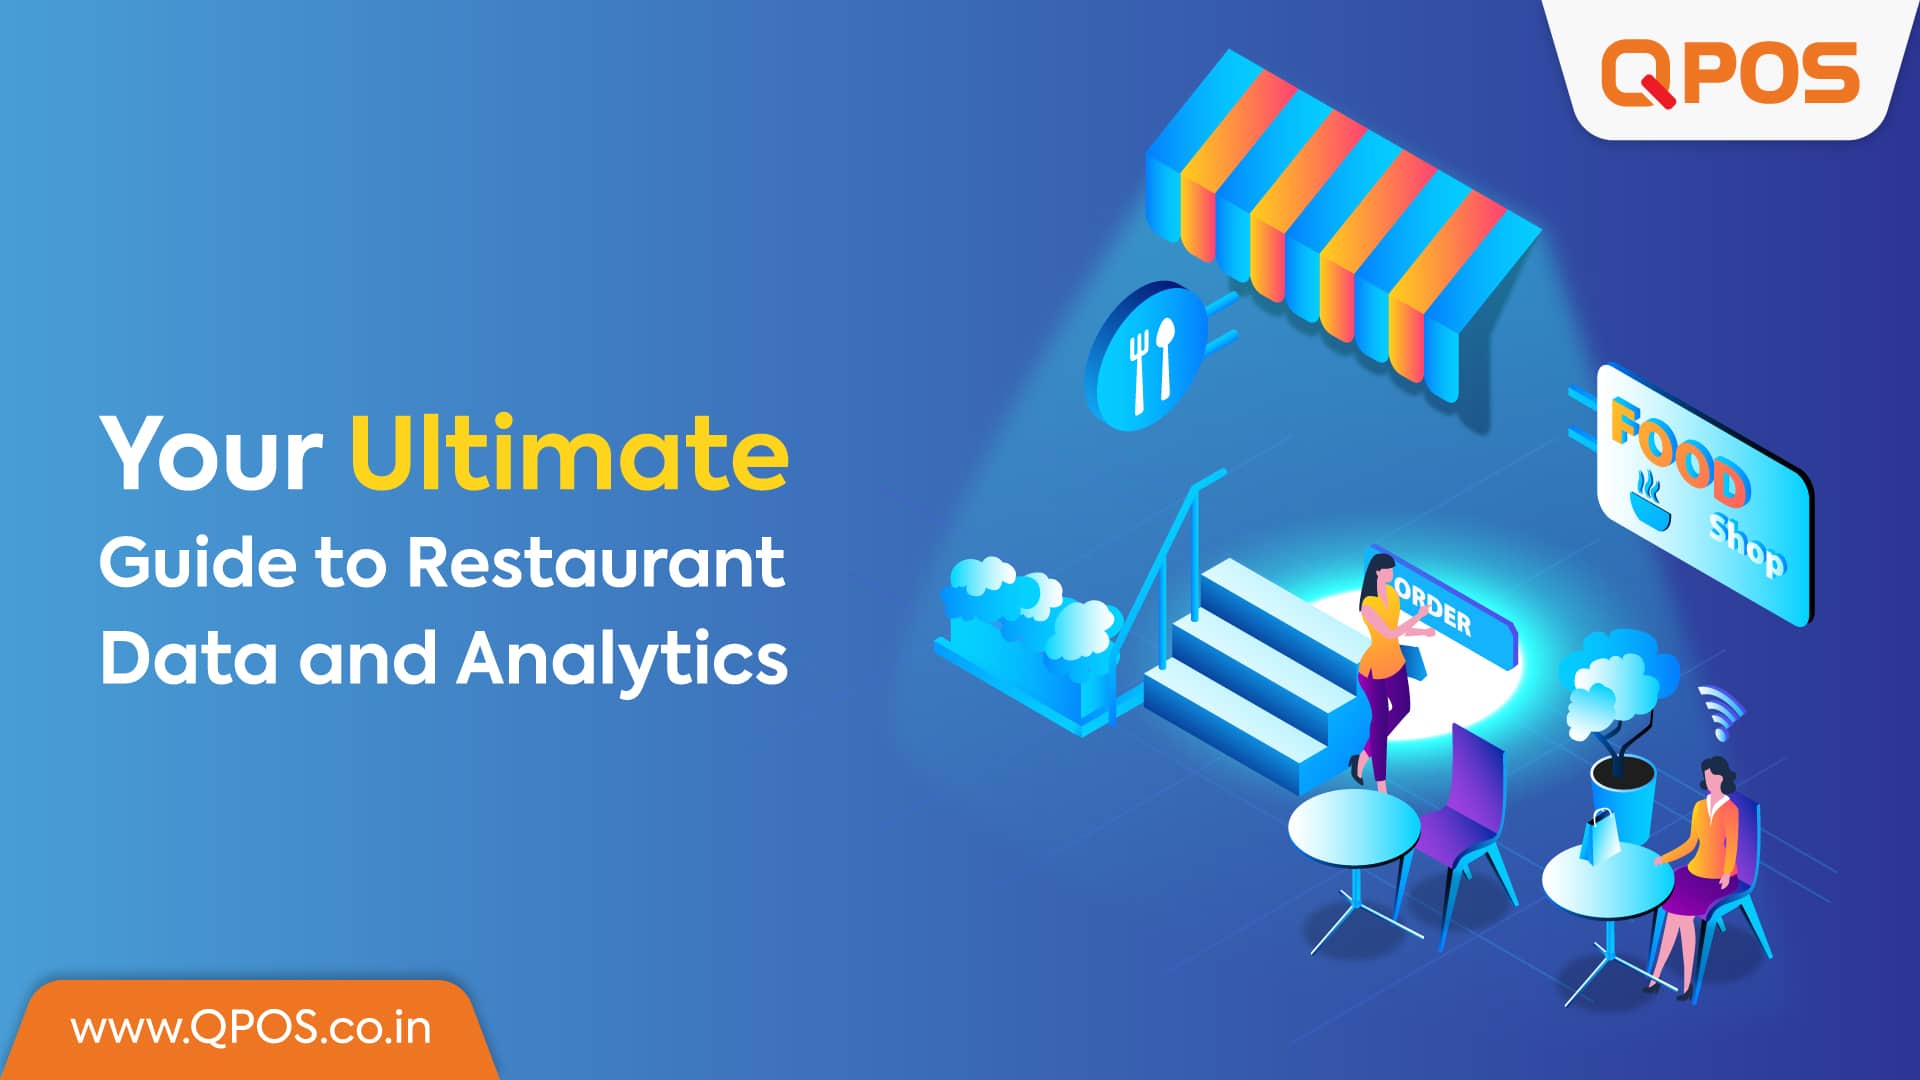 QPOS-Your Ultimate Guide to Restaurant Data and Analytics